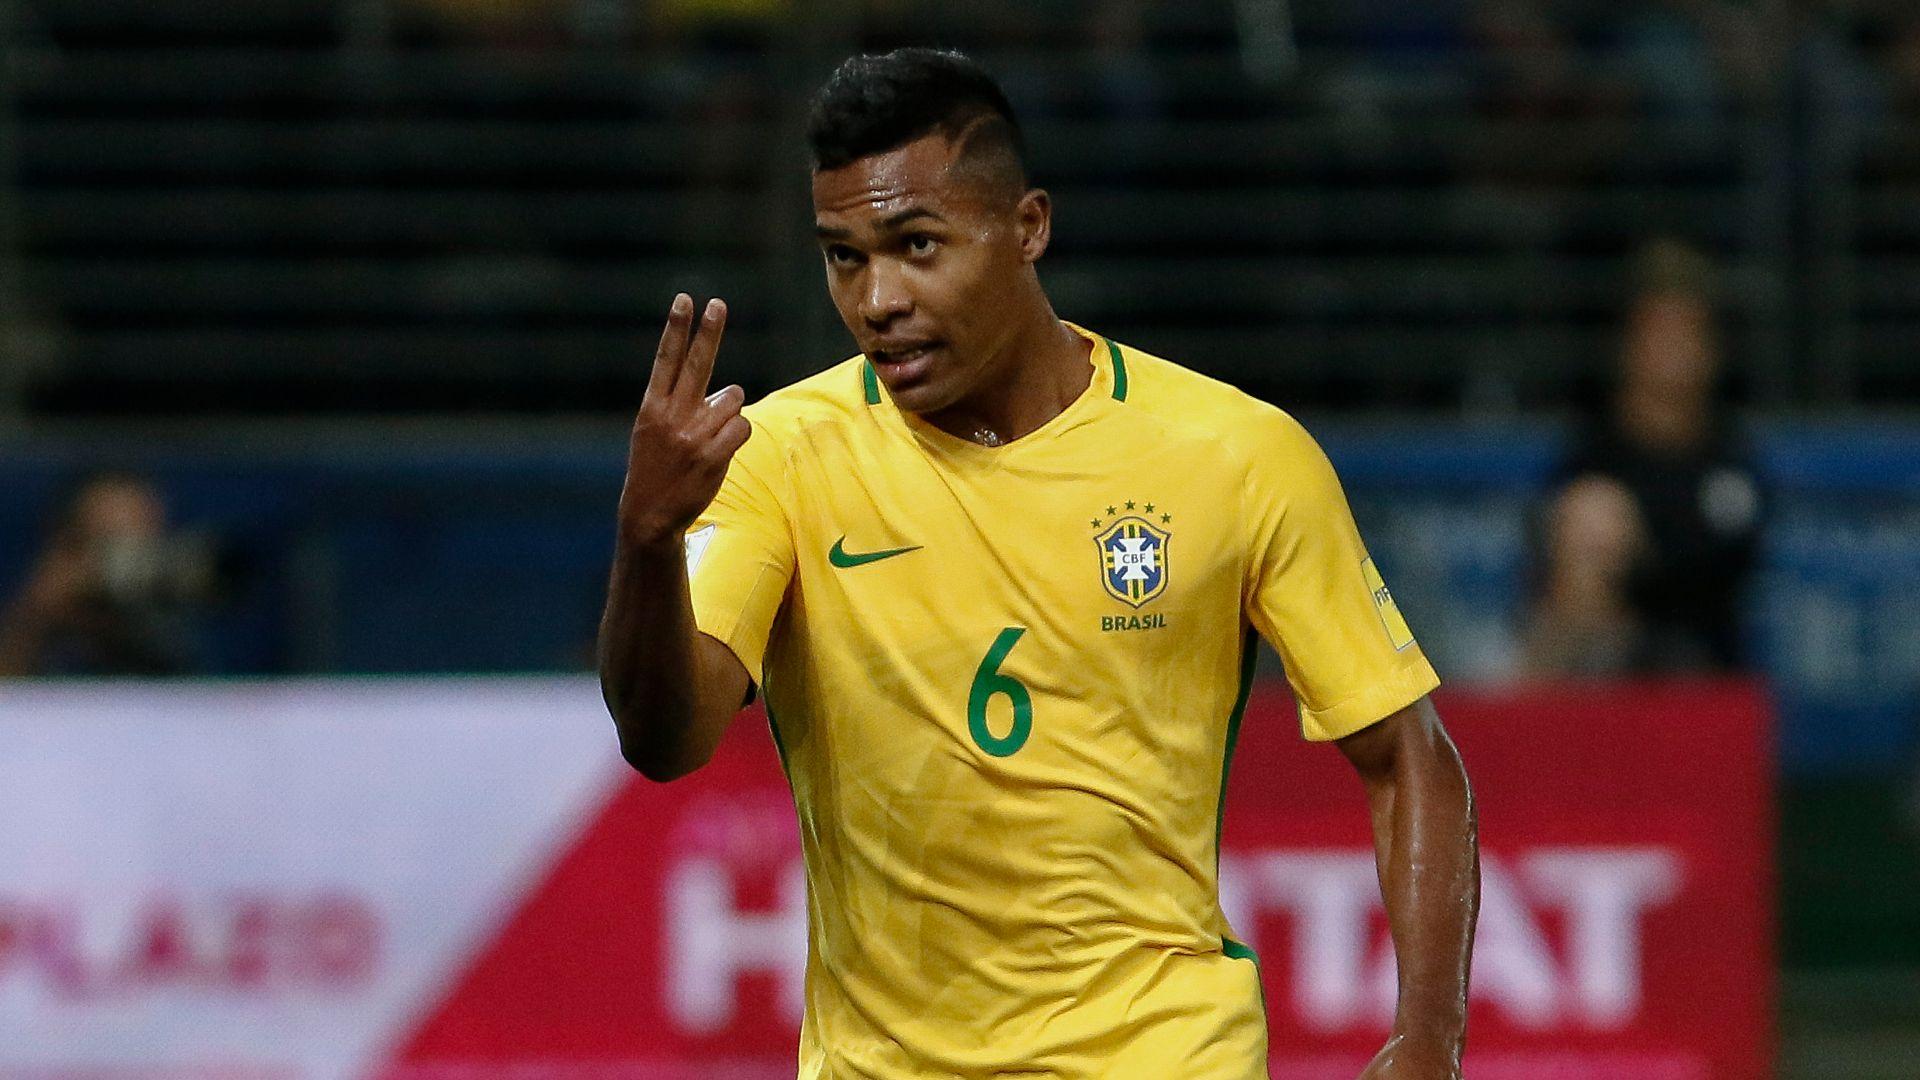 Alex Sandro forced to withdraw from Brazil squad. Soccer. Sporting